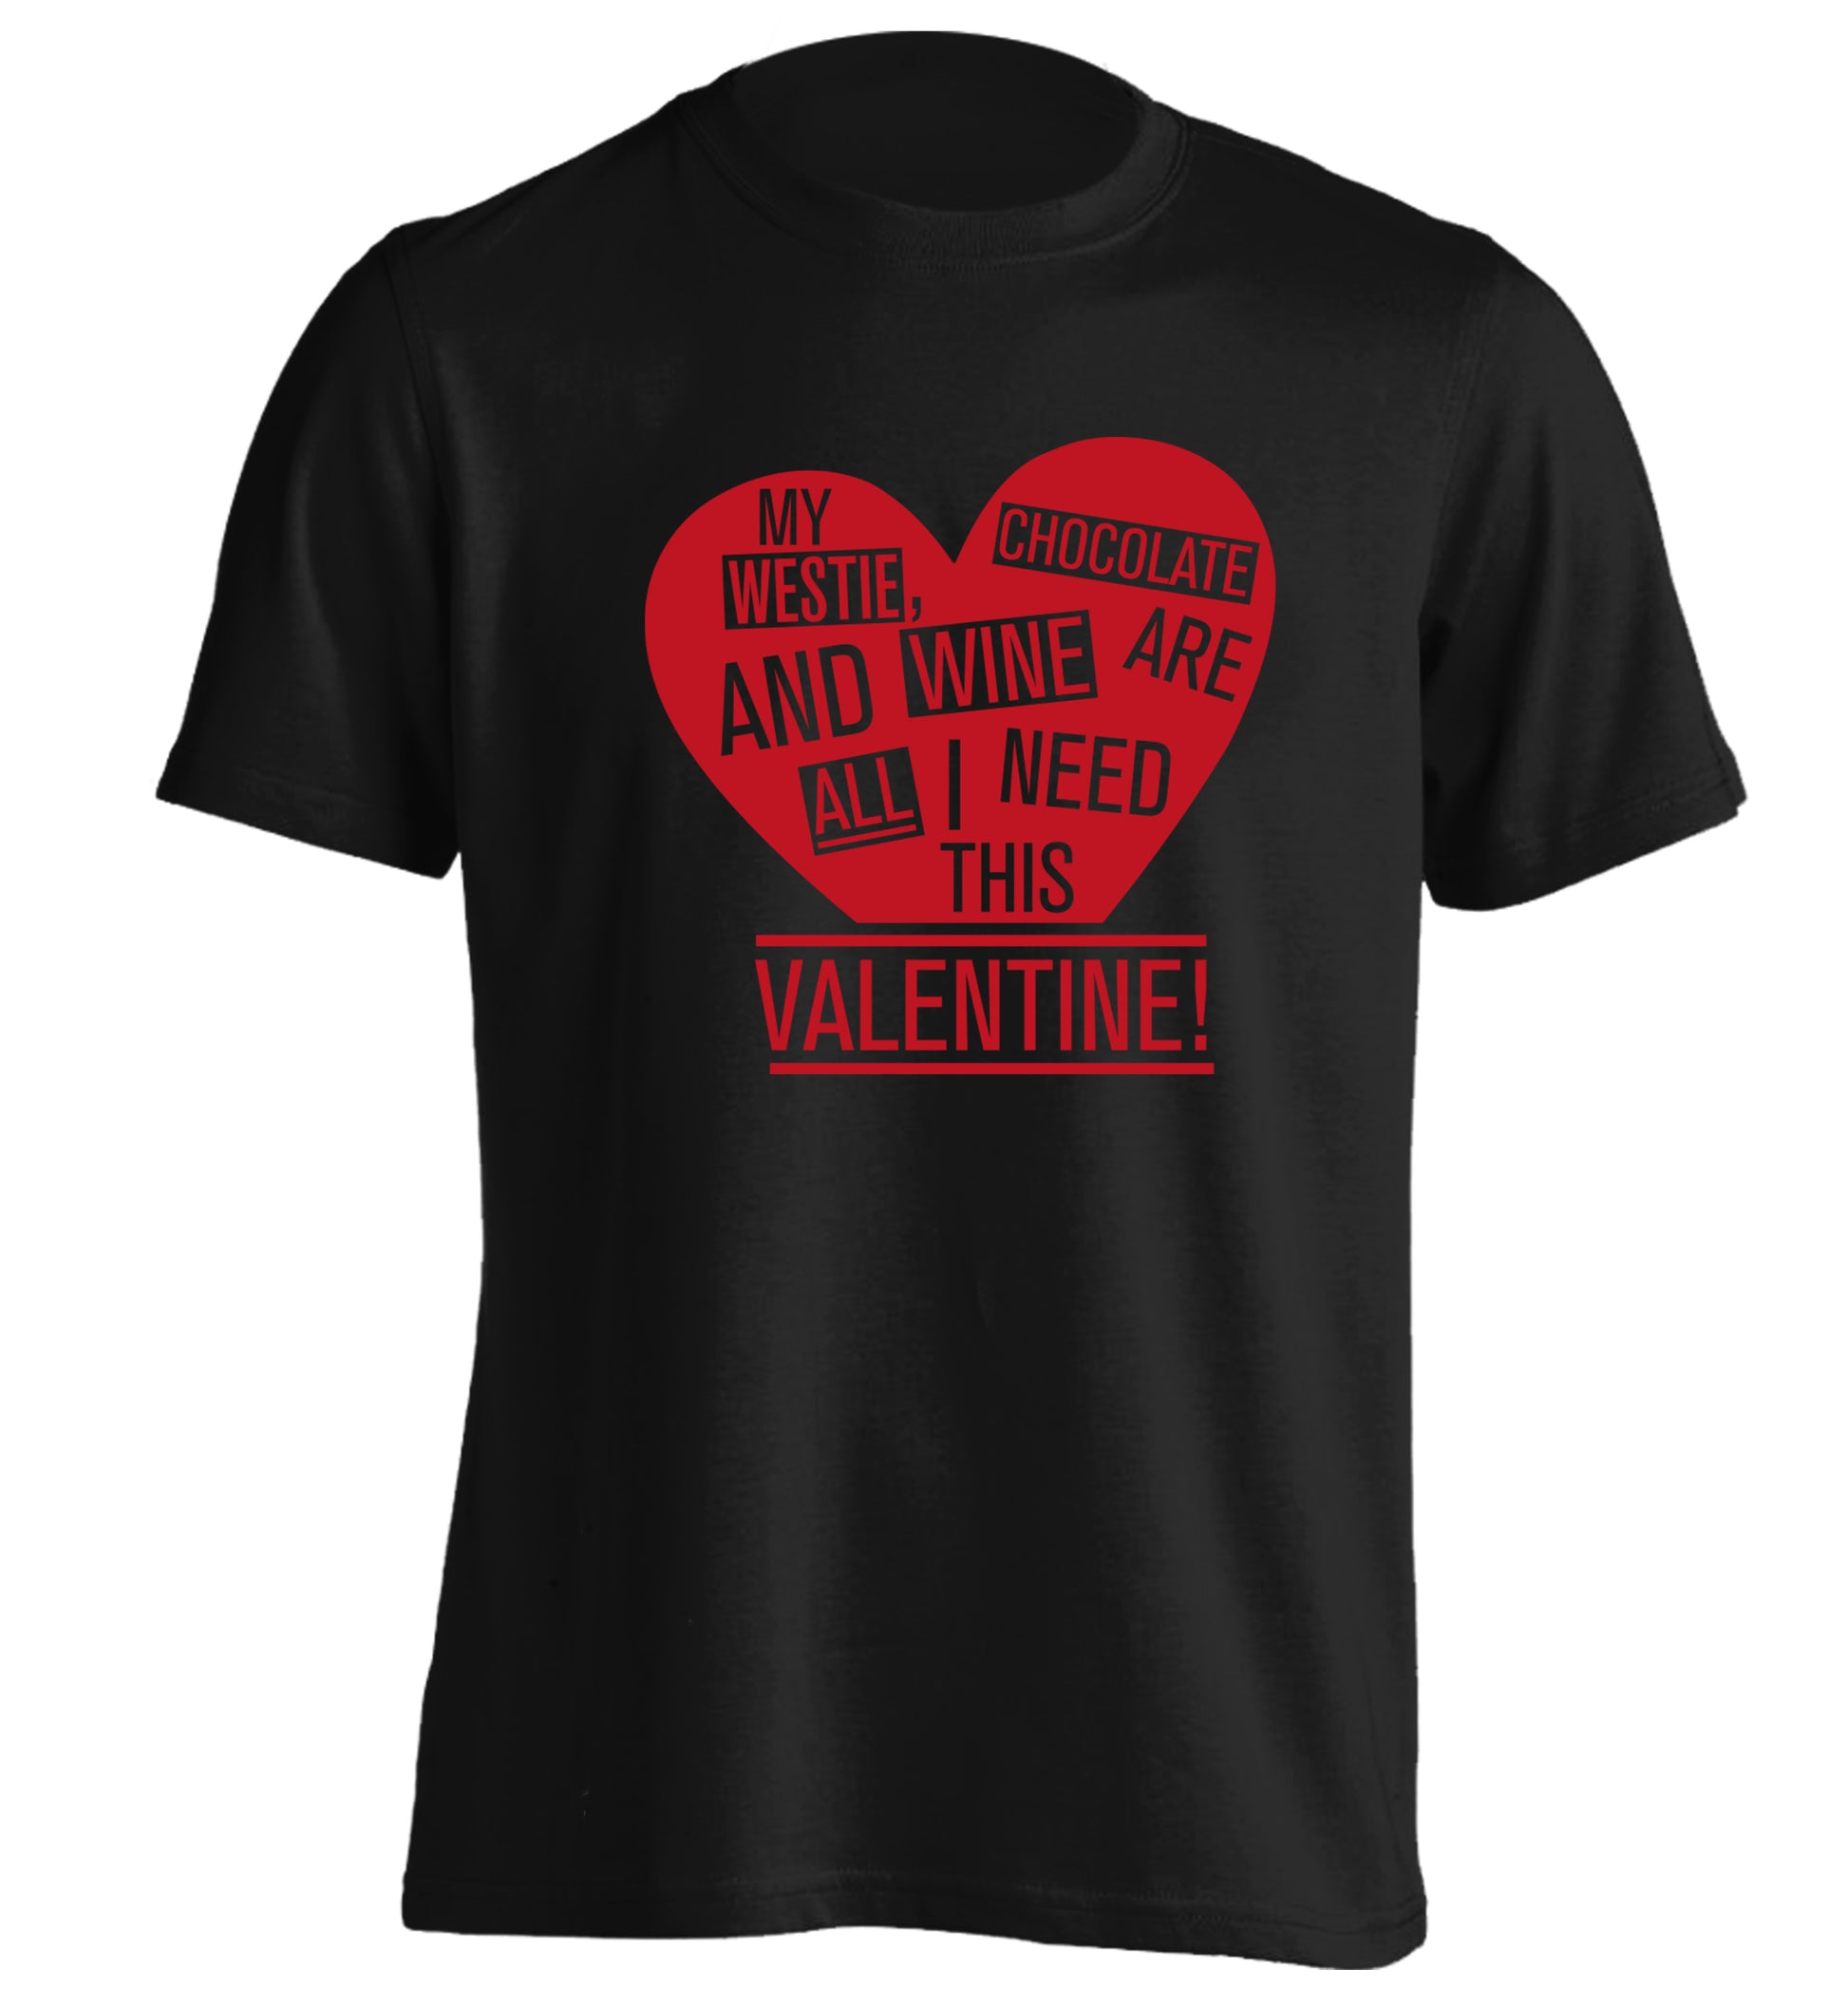 My westie, chocolate and wine are all I need this valentine! adults unisex black Tshirt 2XL